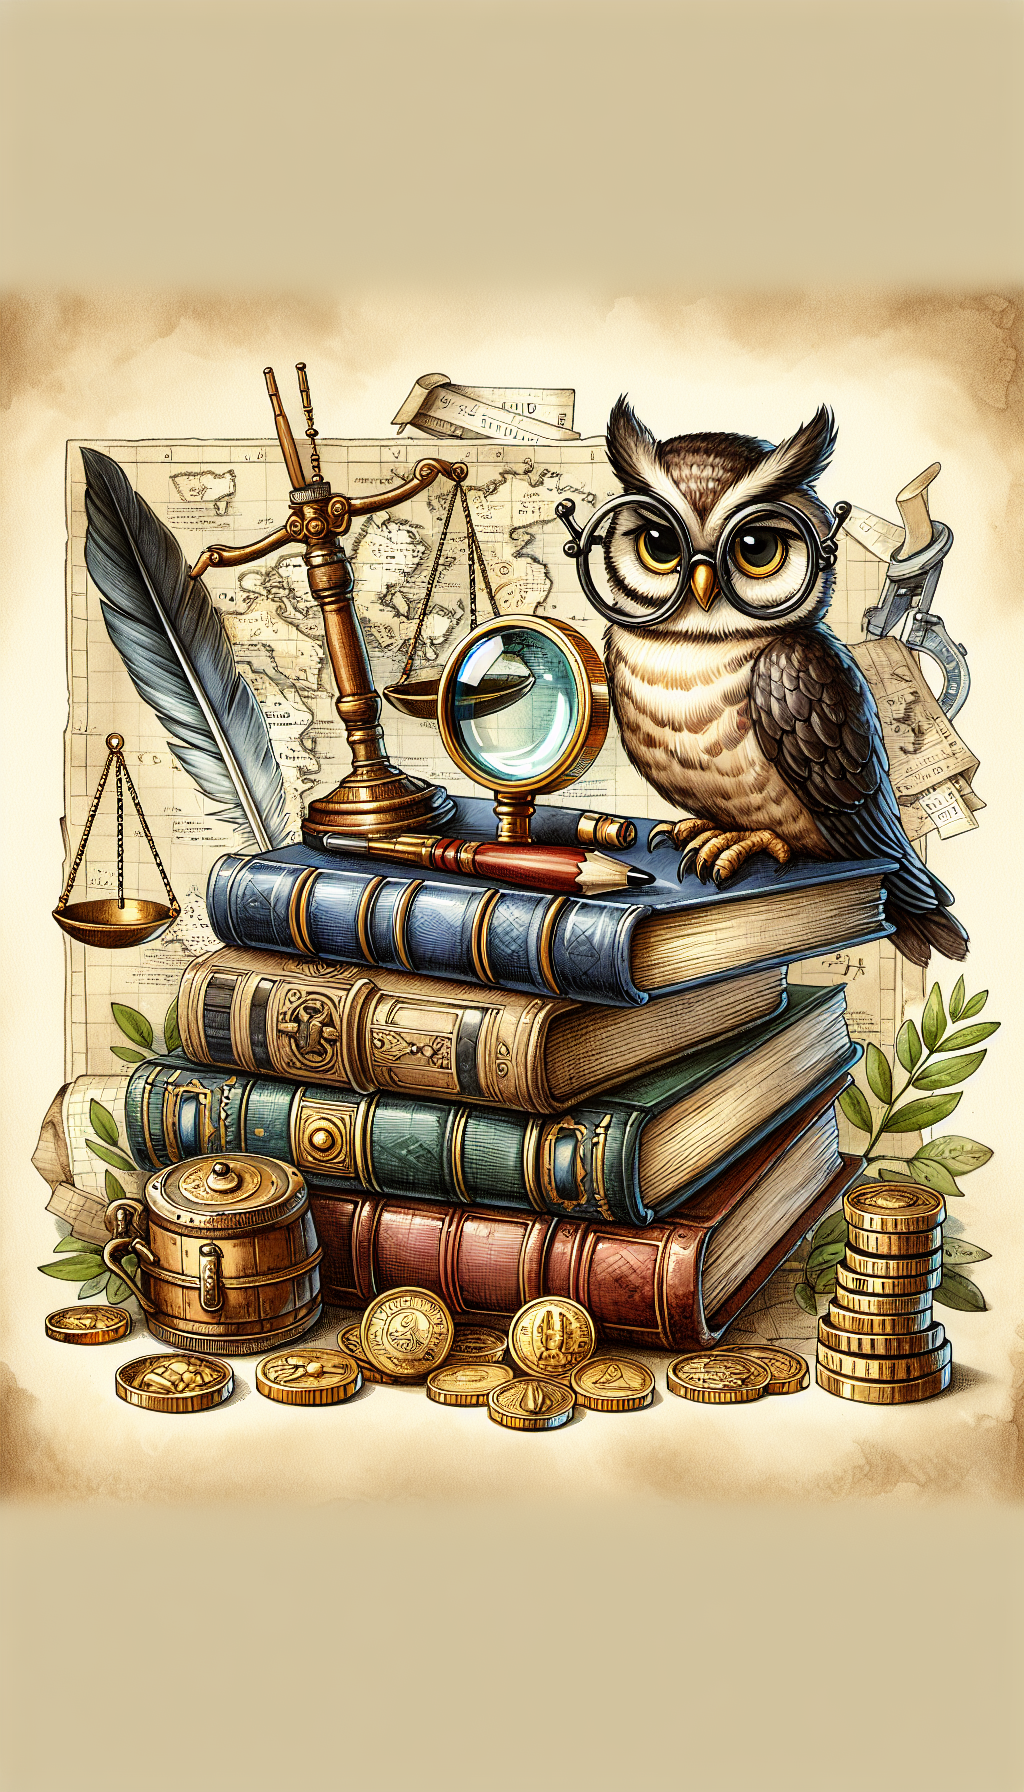 An illustration depicts an antique magnifying glass hovering over a stack of classic books nestled on a treasure map background. A whimsical owl perched atop wearing spectacles and a jeweler's loupe holds a quill as if jotting down appraisal notes, with golden coins and a balance scale subtly suggesting valued antiquity. Various styles—watercolor, ink, and pencil strokes—meld to evoke a vintage, adventure-filled ambiance.